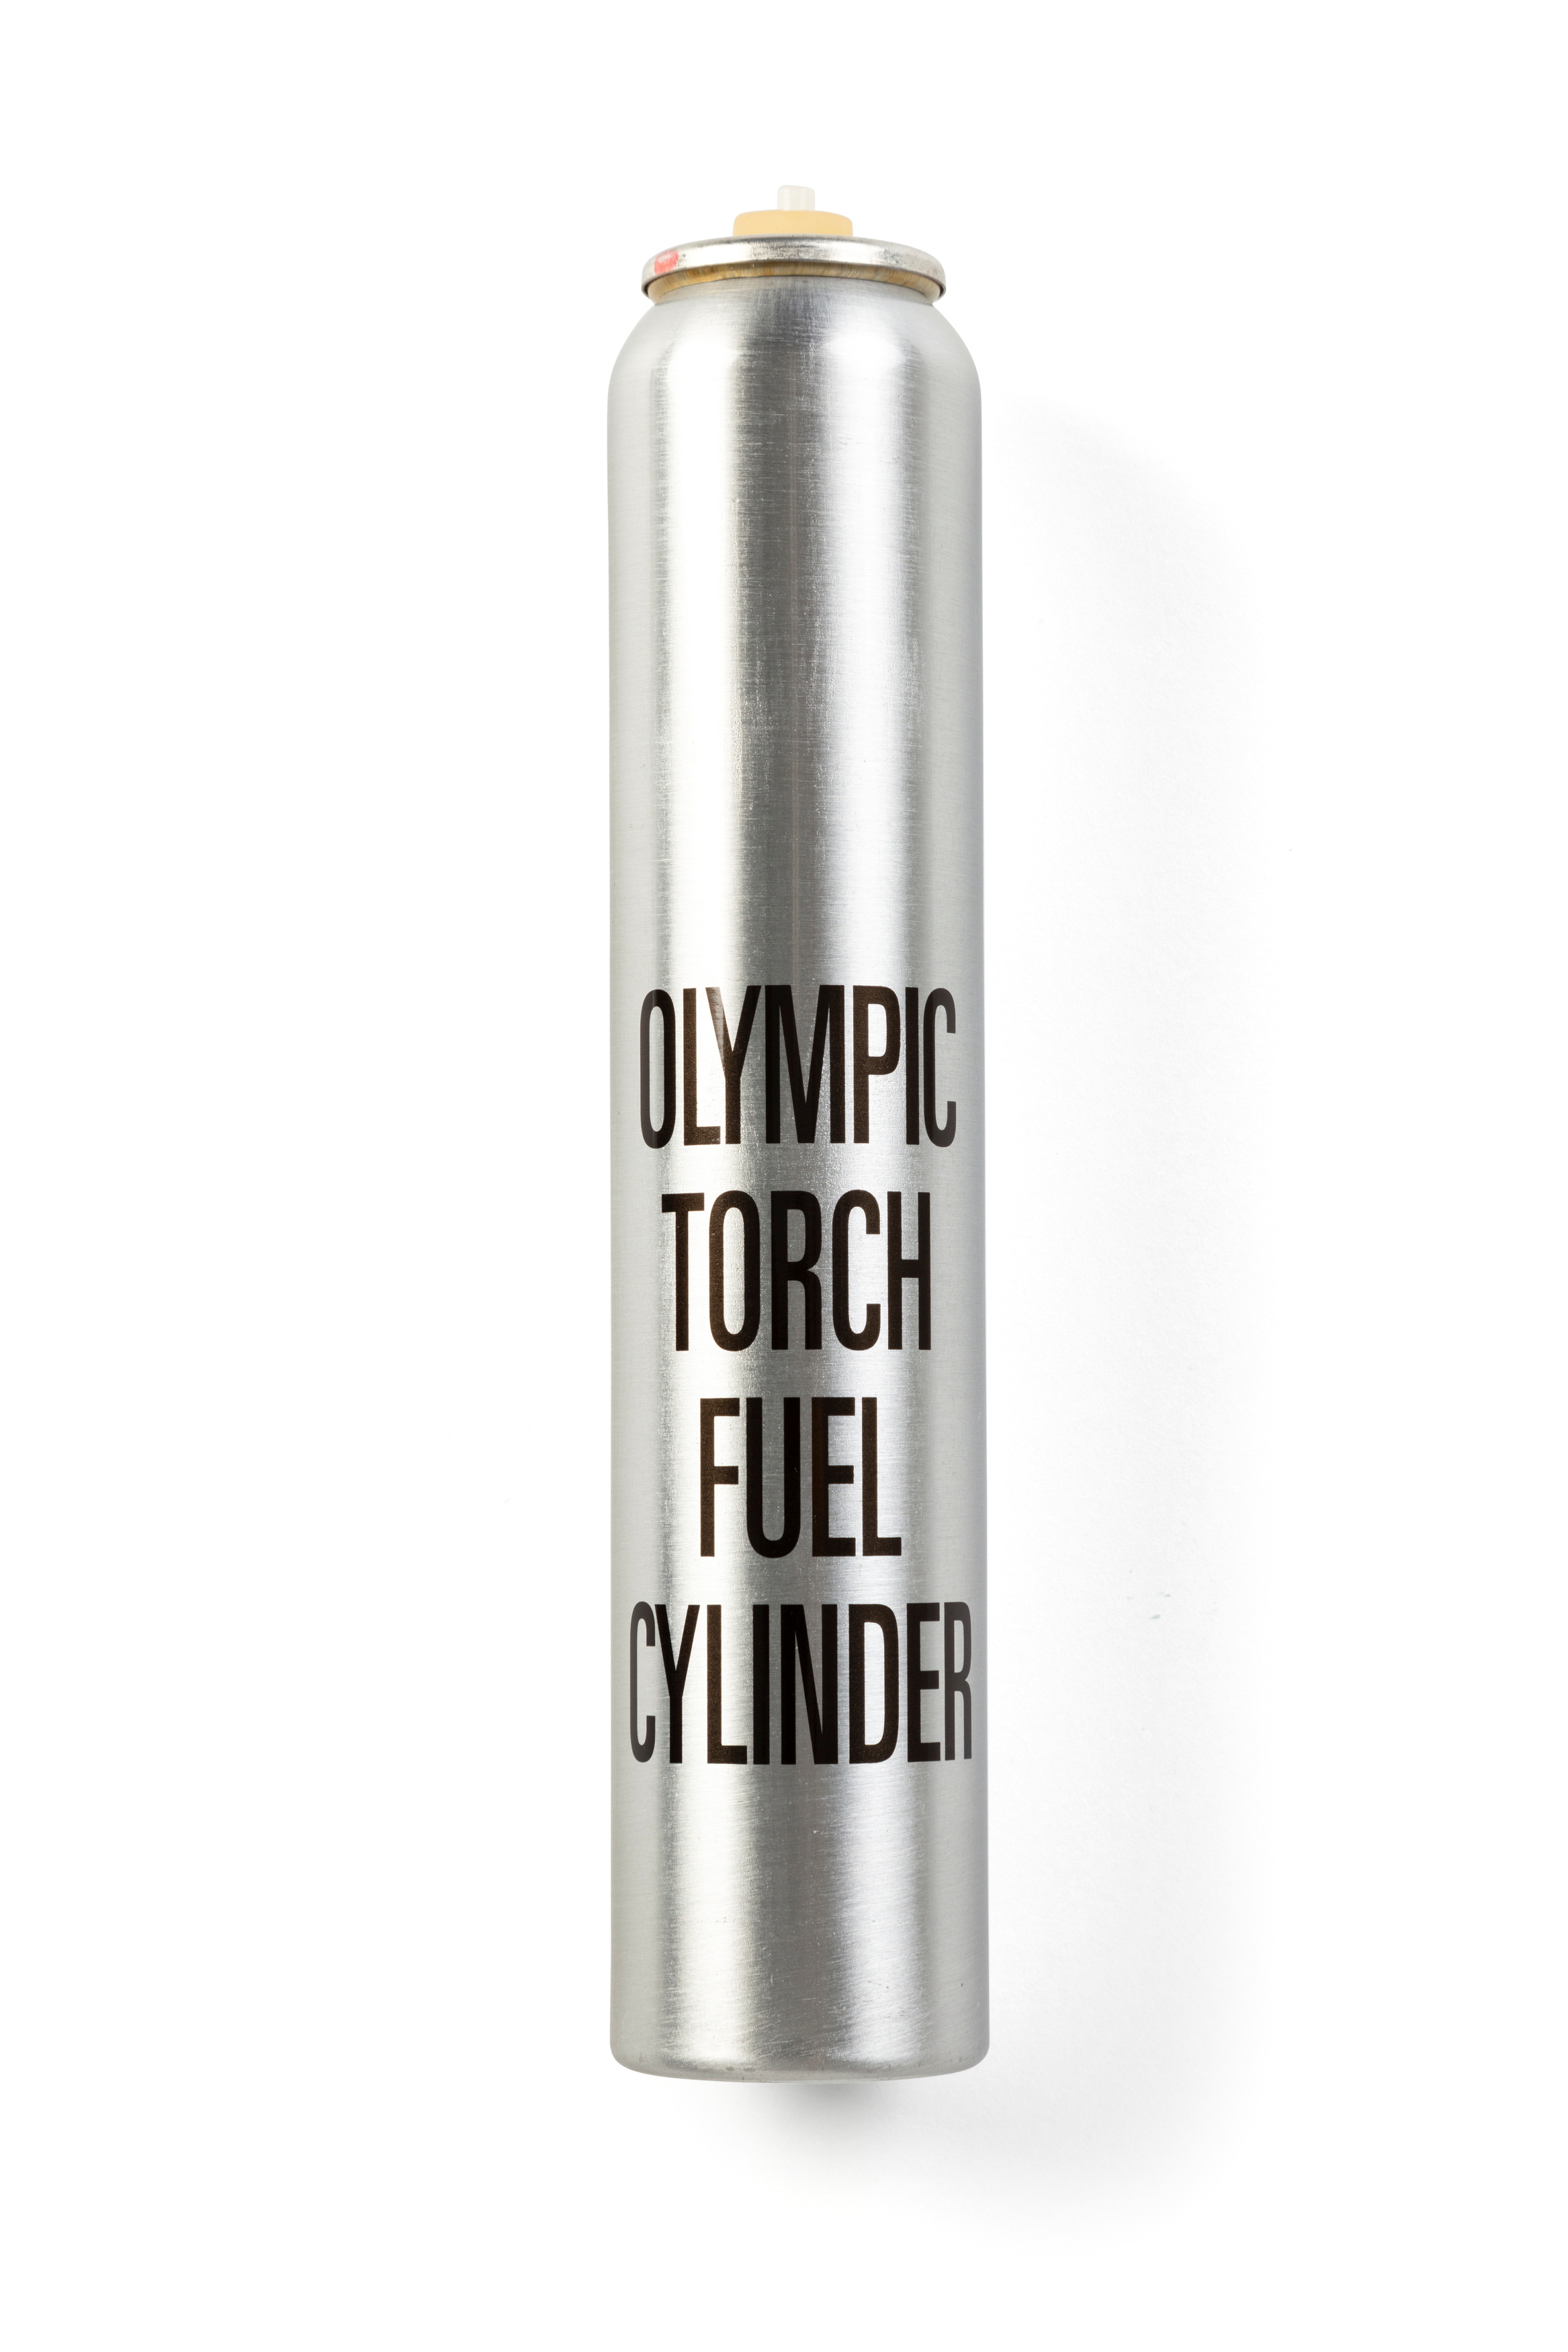 Fuel Cylinder from Sydney 2000 Olympic Games torch used by Cathy Freeman